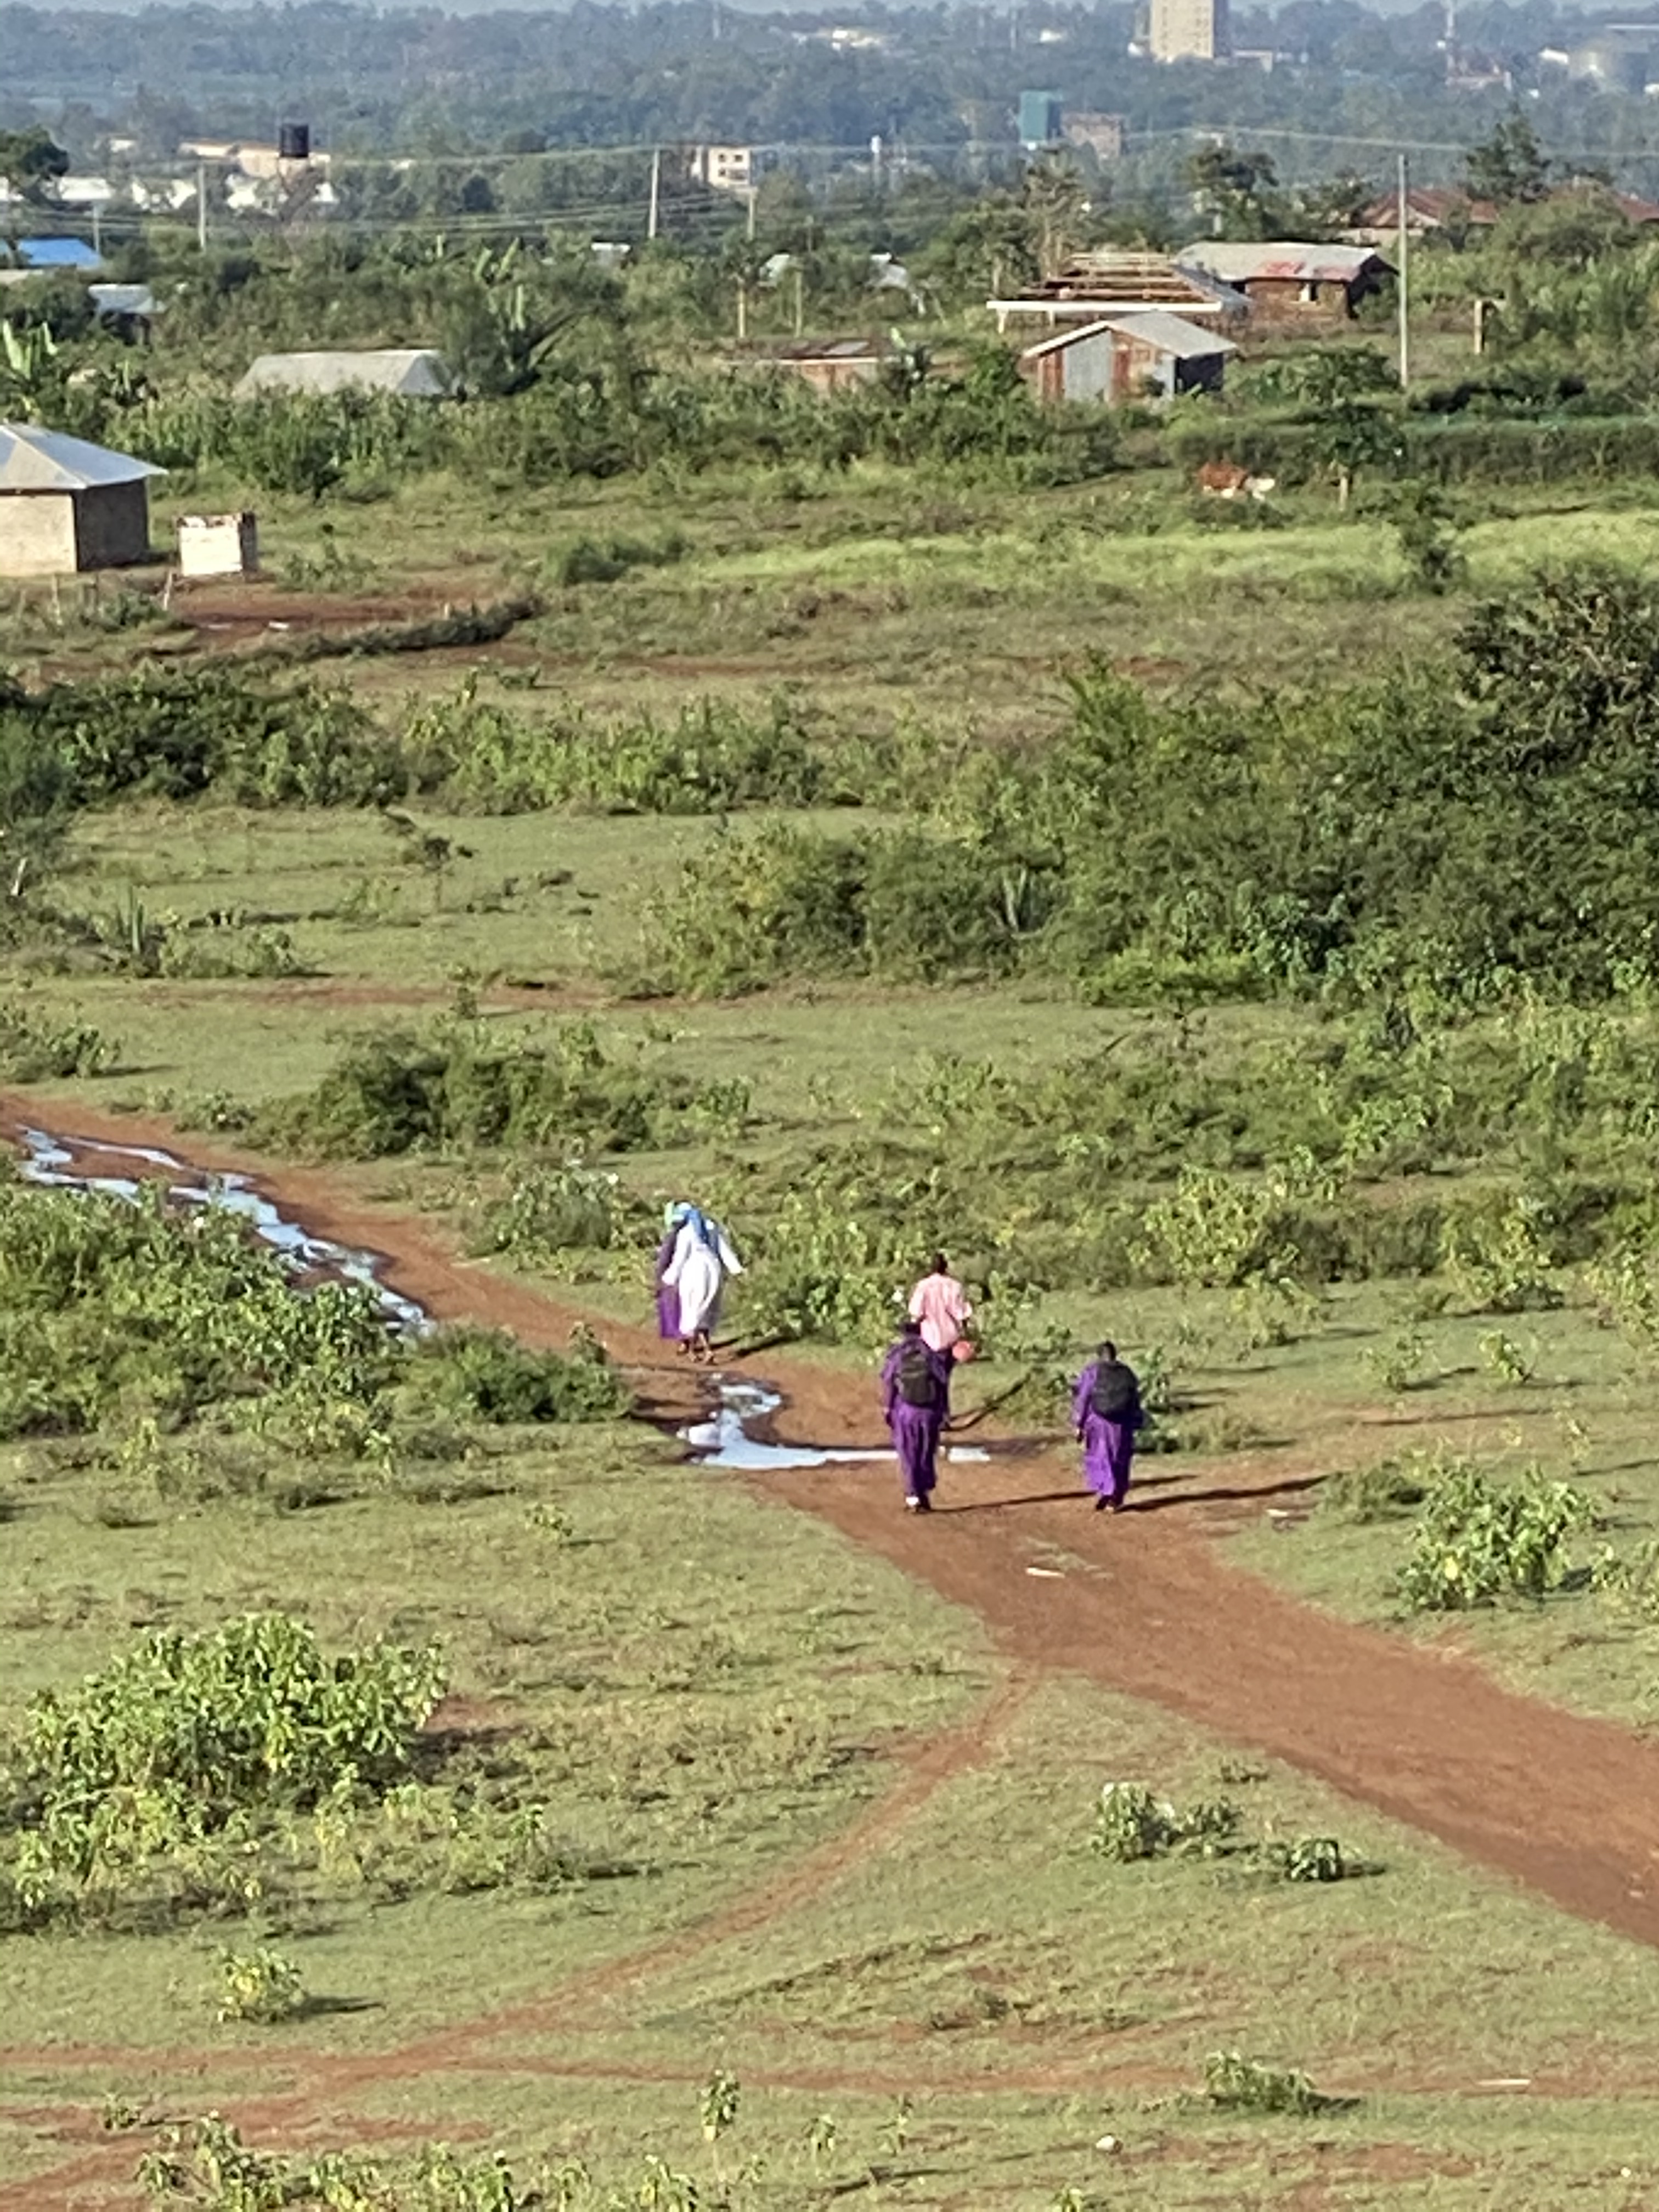 Local villagers walking to church on Sunday morning.